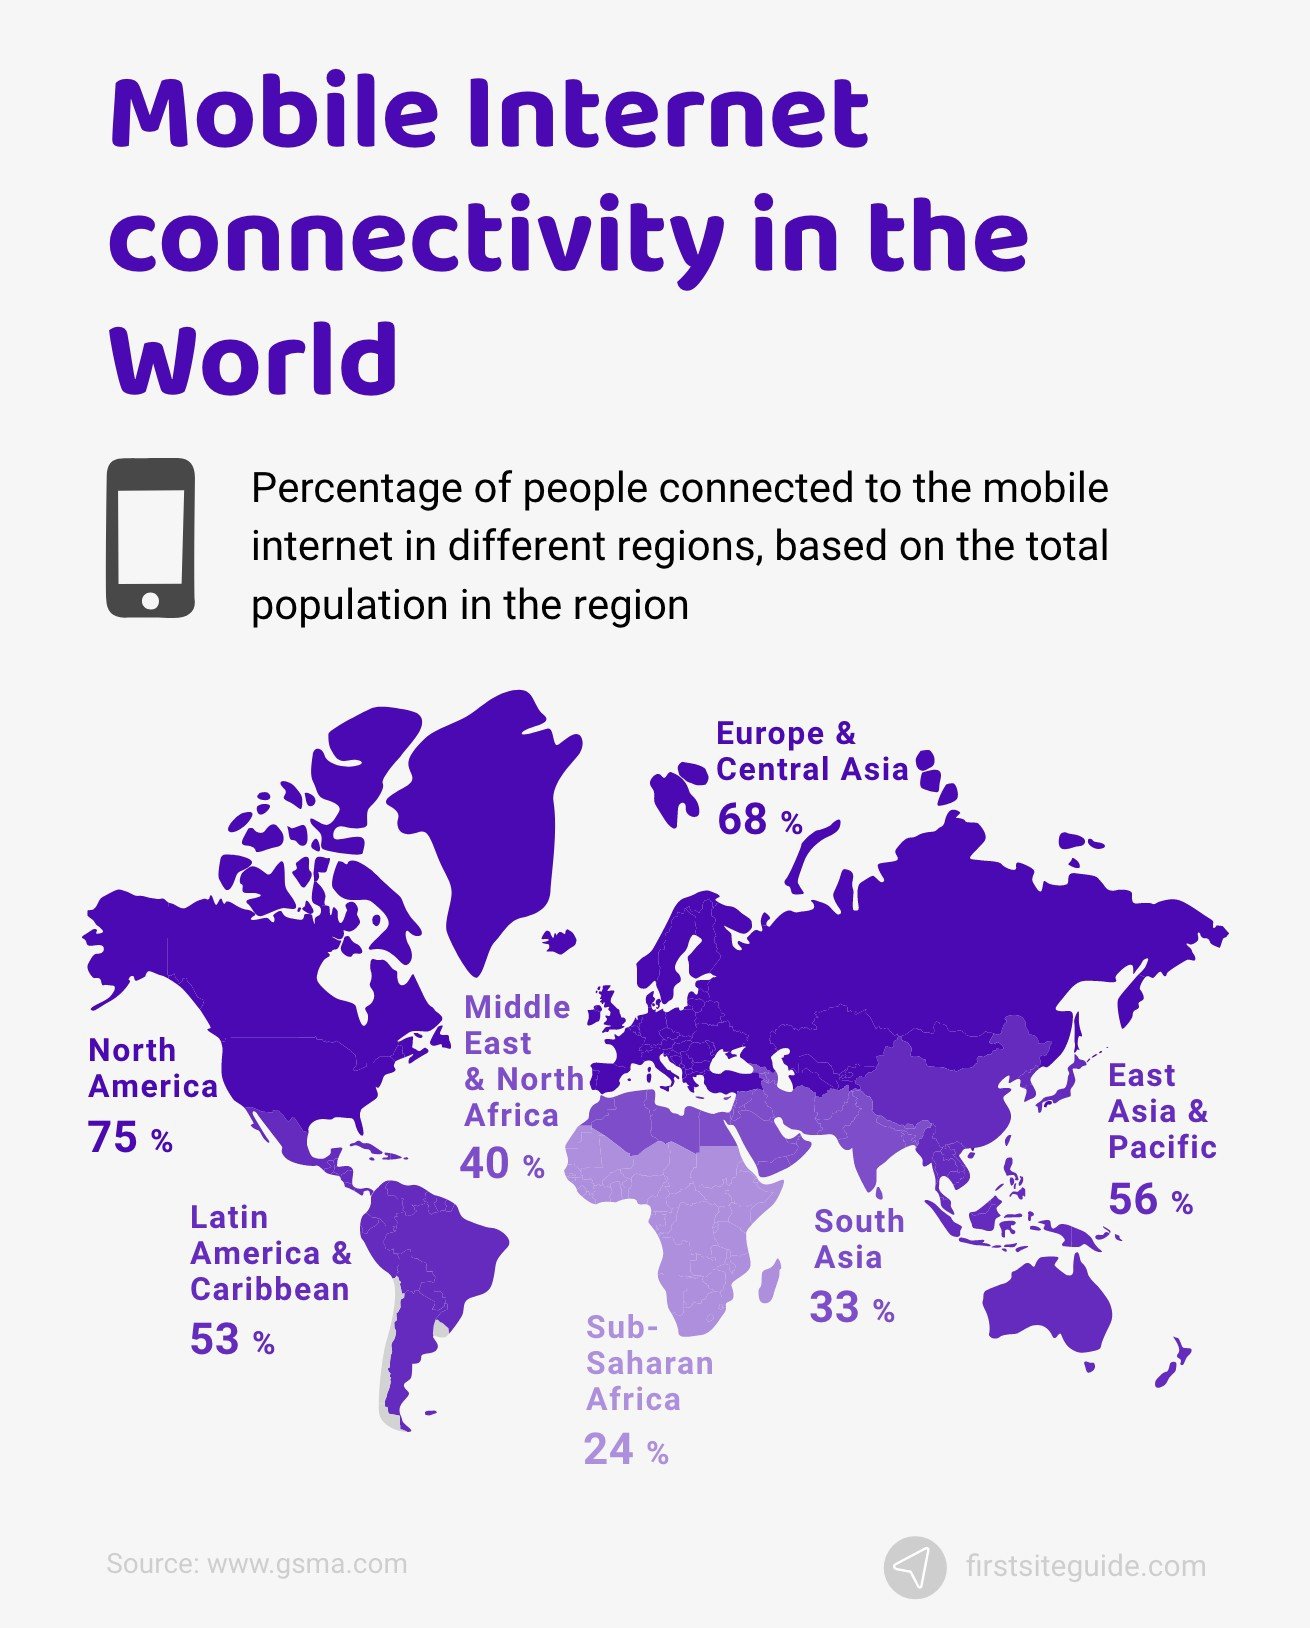 Mobile Internet connectivity in the World